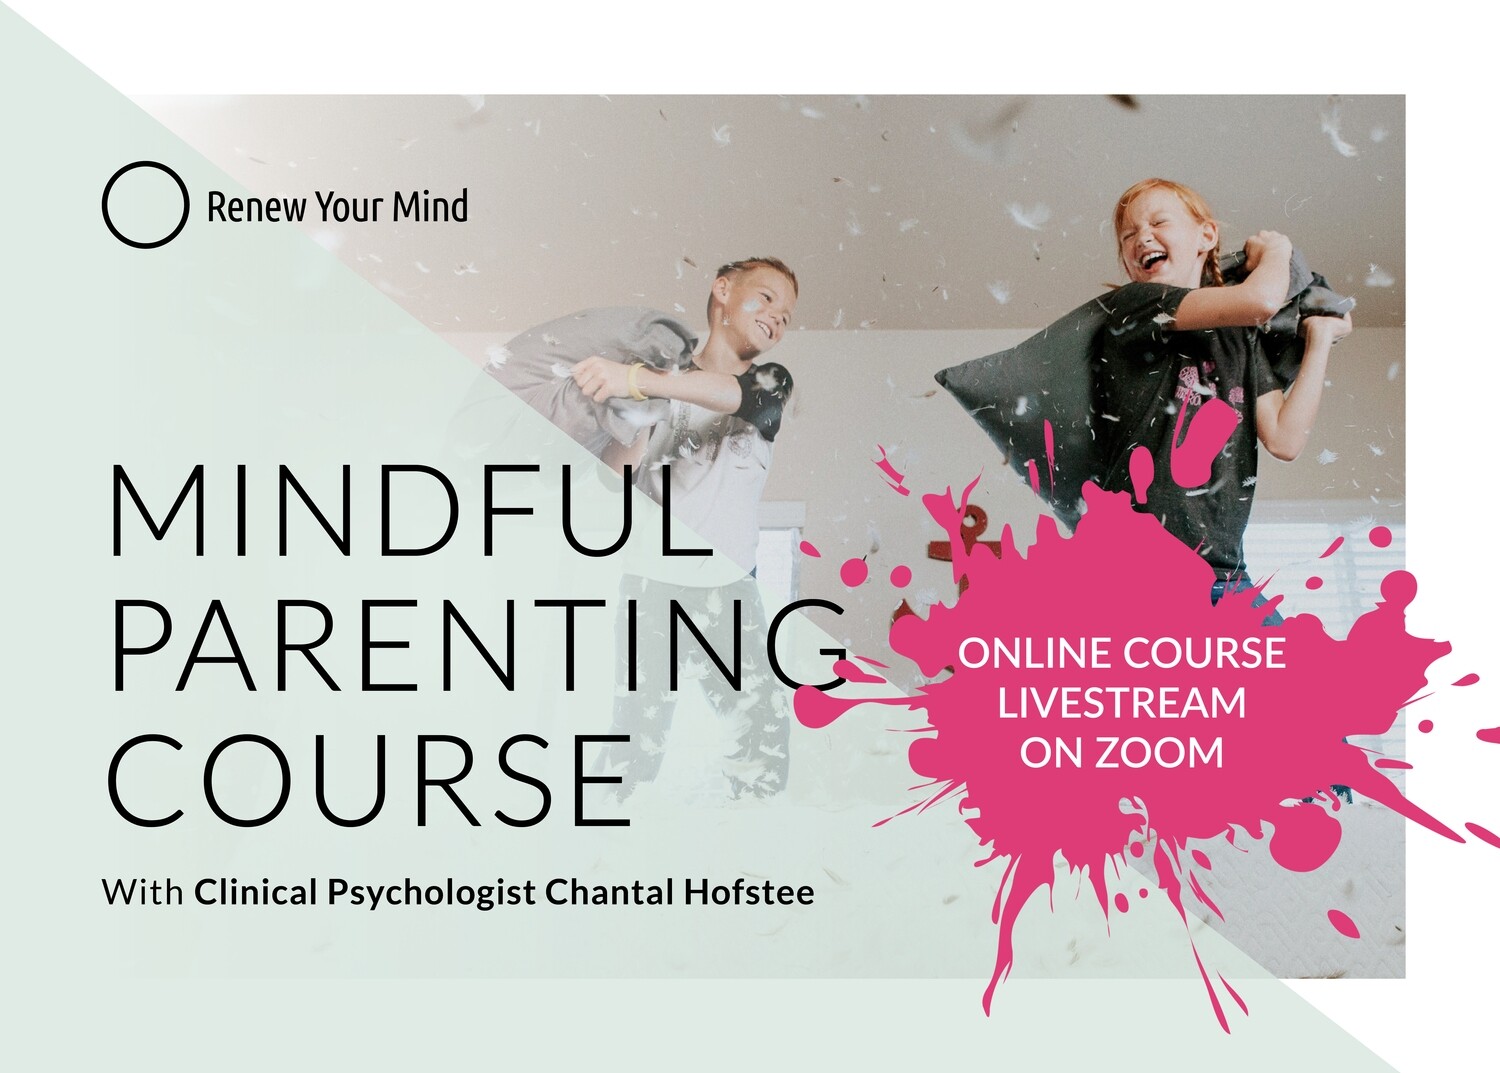 Online Mindful Parenting course term 1: 6 session course, Wed 22nd Feb '23